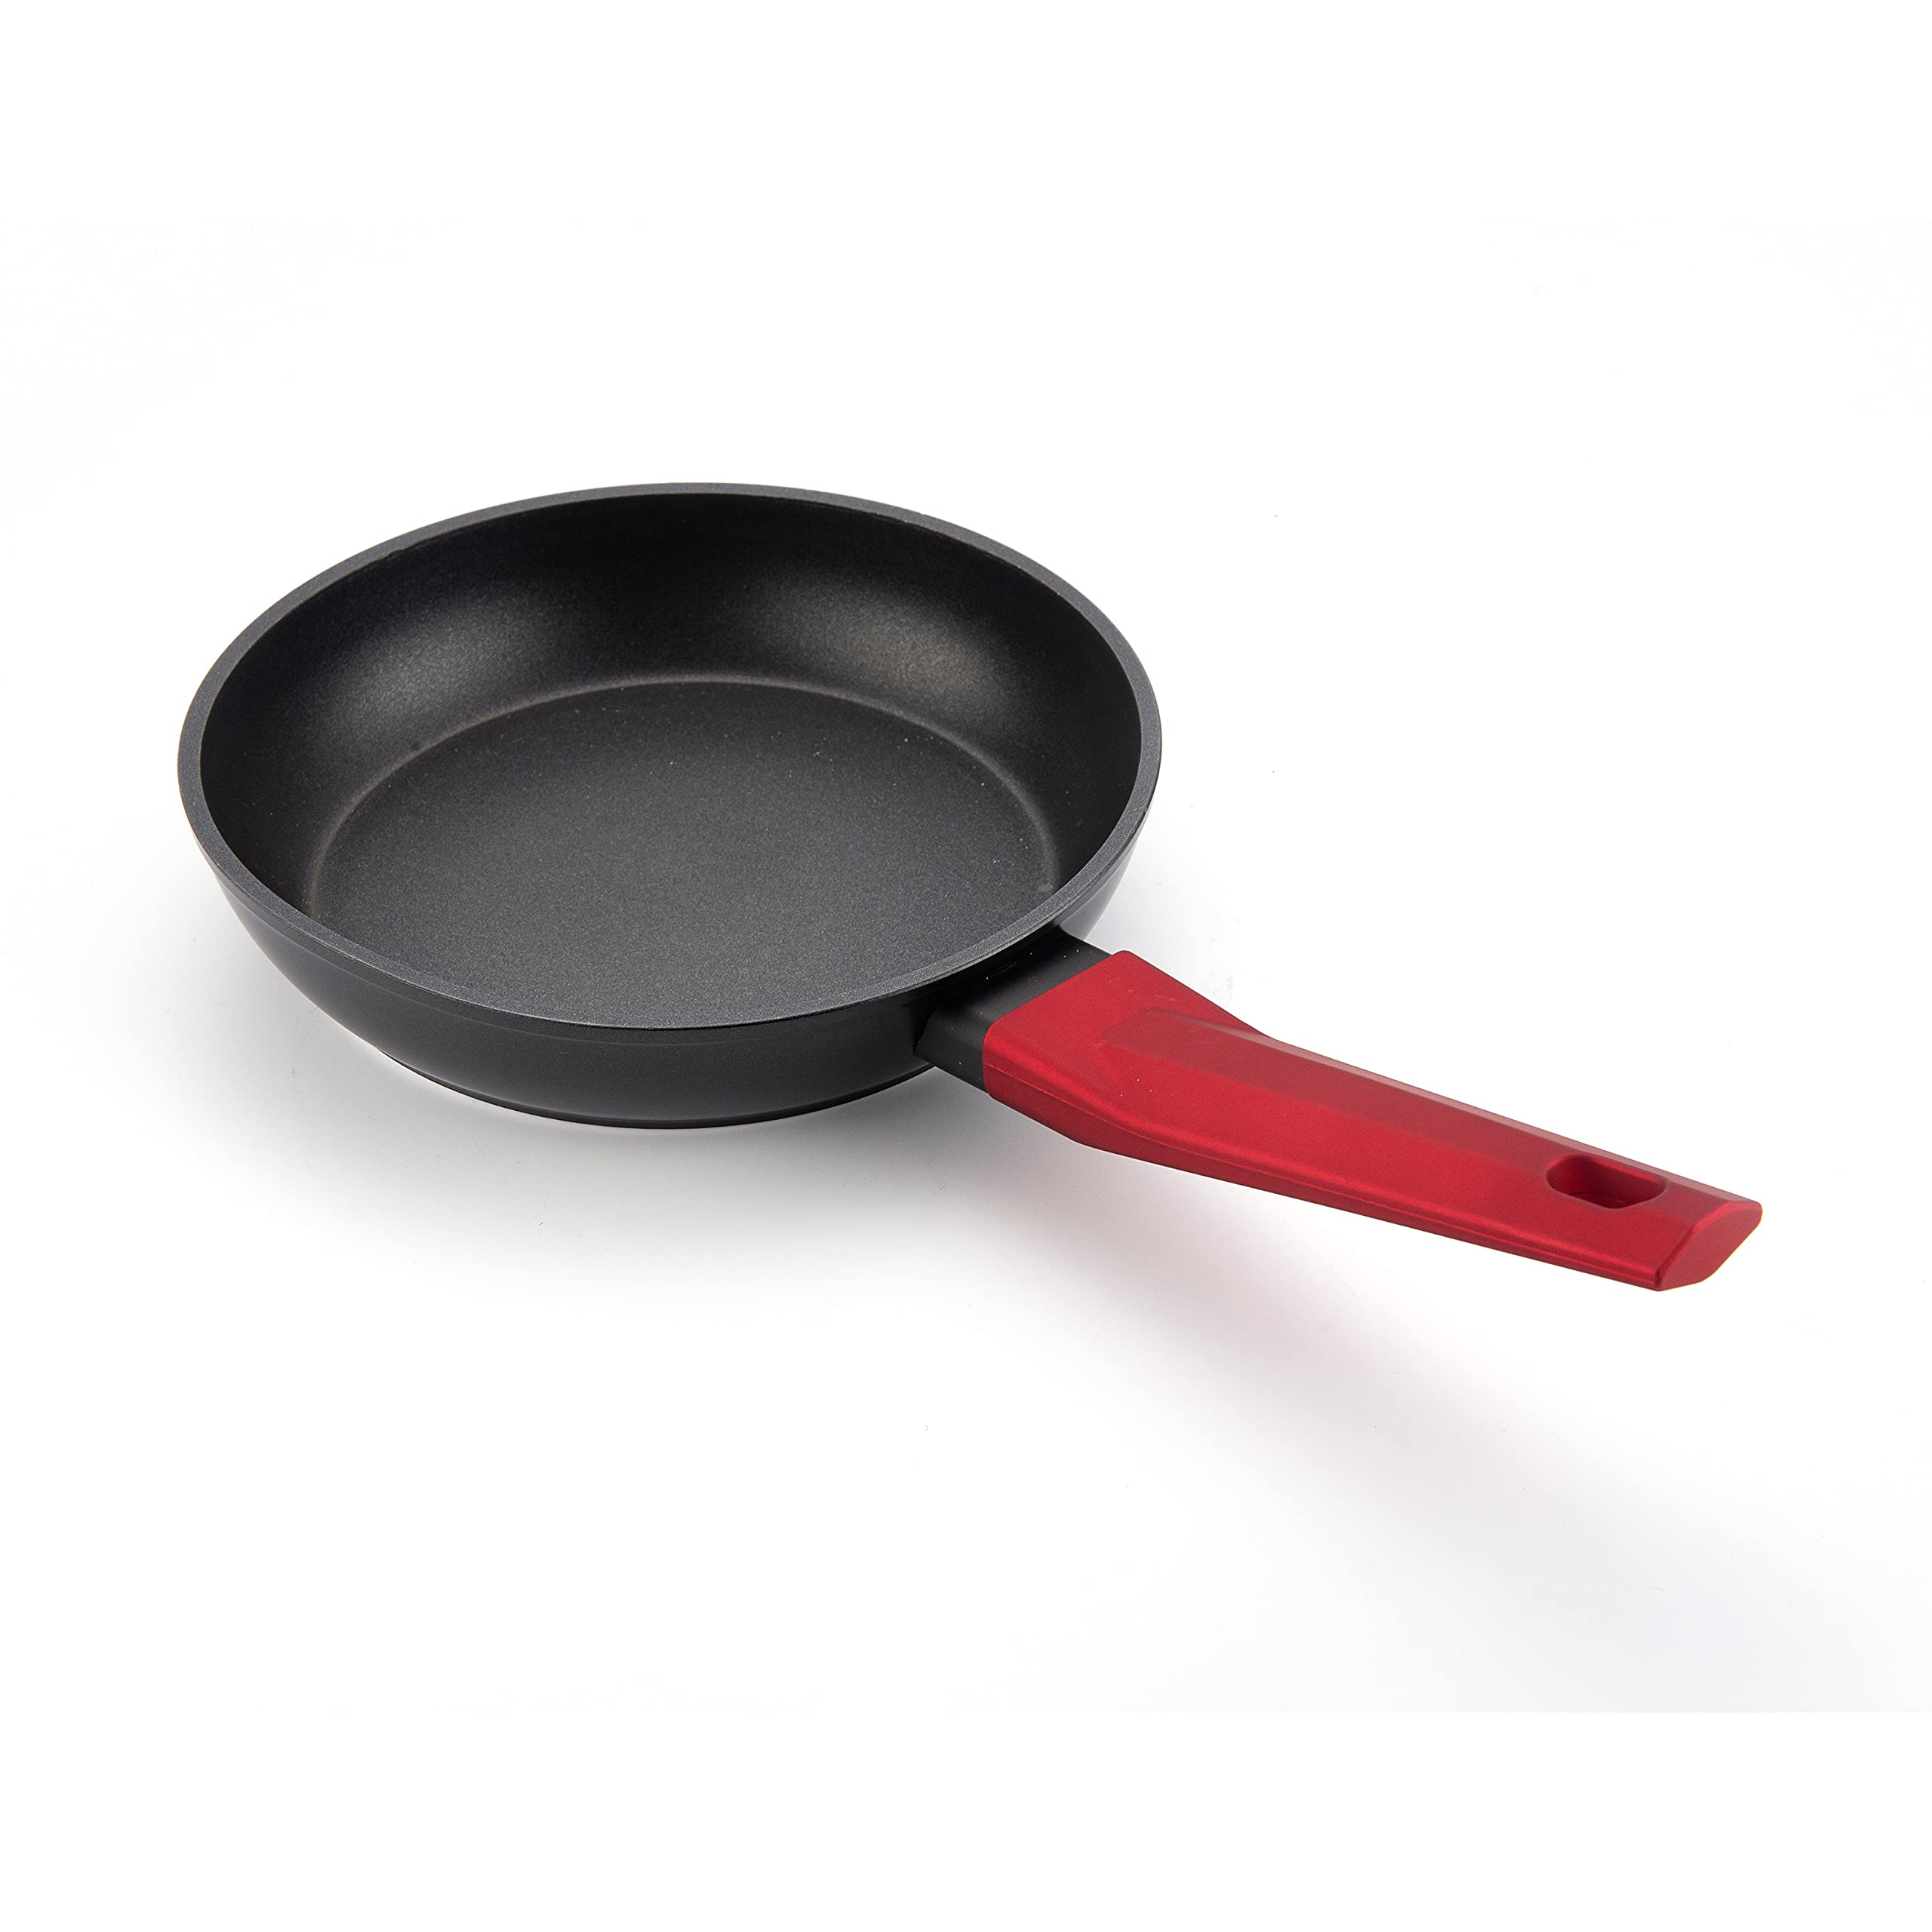 Hamilton Beach Aramco Skillet Frying Pan,12-Inch, Nonstick PFOA-Free Coating, High Performance Forged Aluminum, Induction Compatible, Stay-Cool Bakelite Handle, Large Size, Black with Red Handle